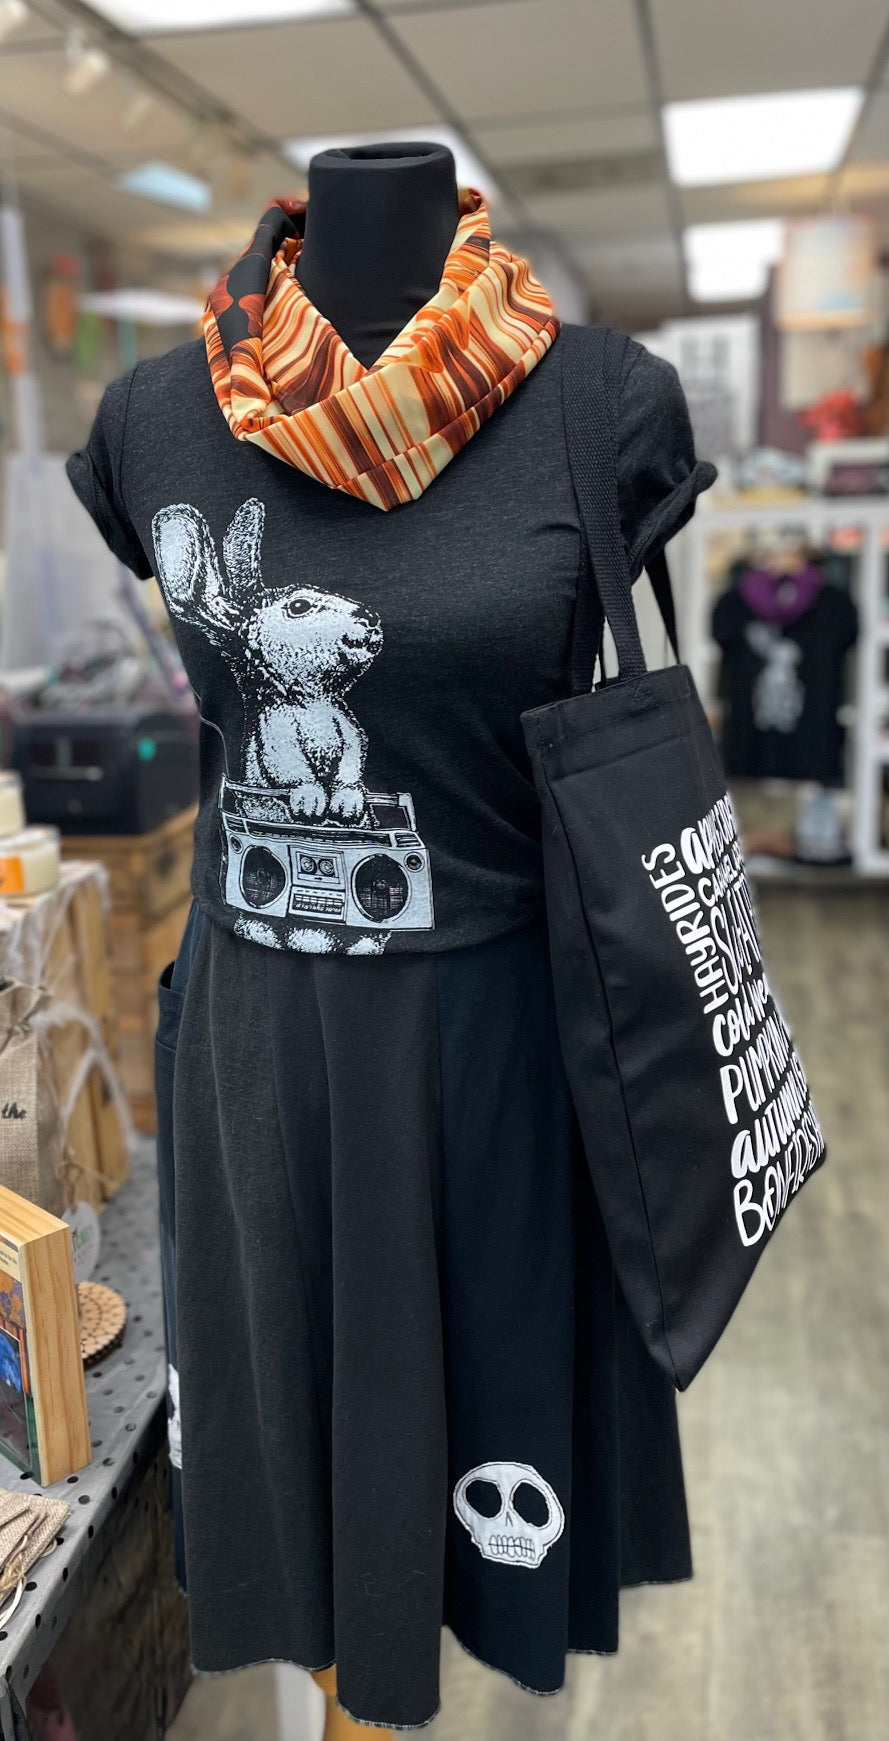 Image shows a mannequin dressed in an orange scarf, a charcoal grey t-shirt with a bunny holding a boombox printed on it, and skirt with appliqued skulls on the hem.